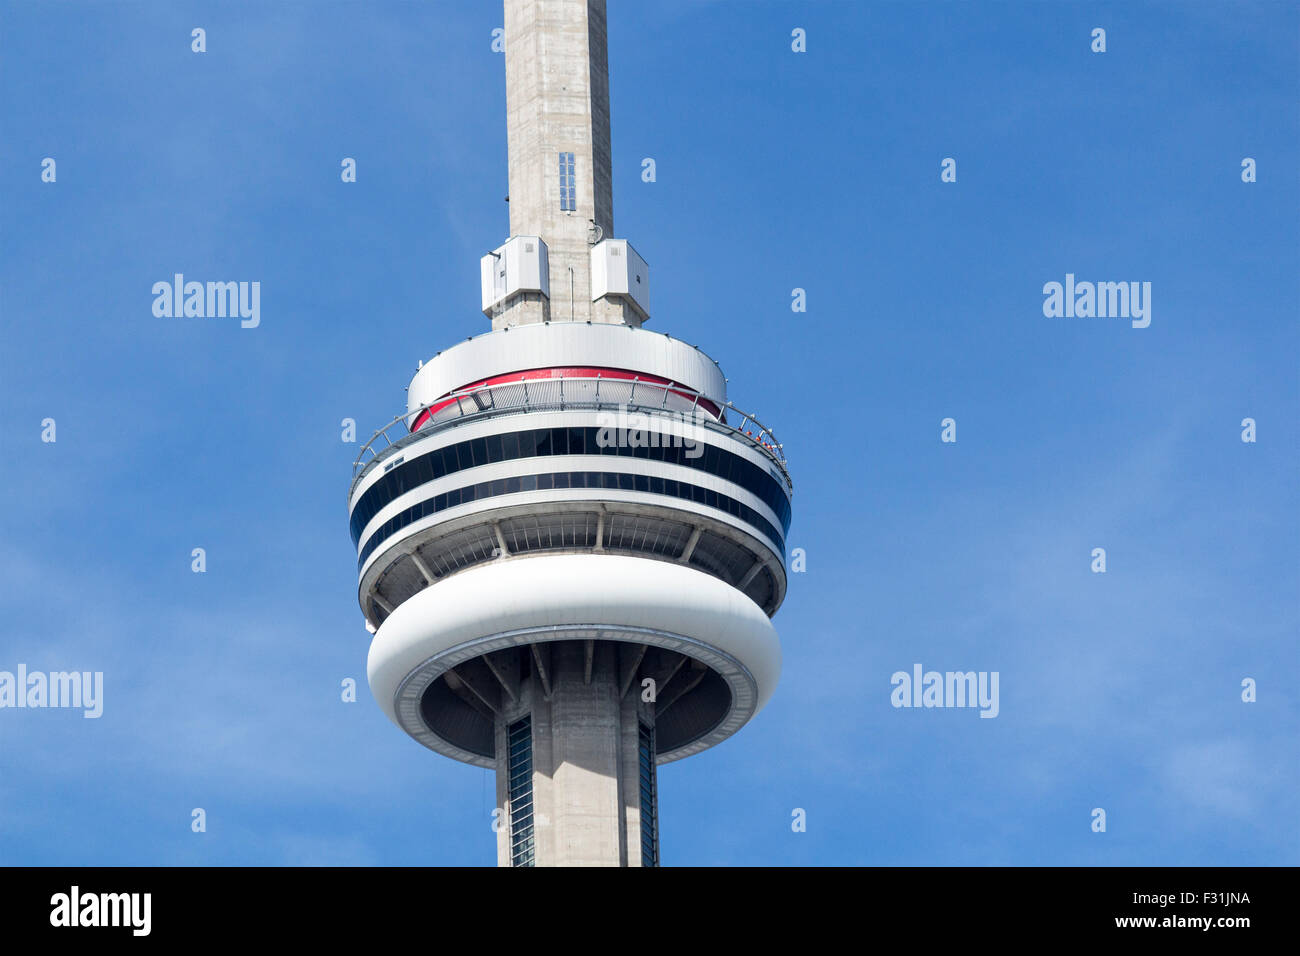 People doing the edge walk on the CN Tower in Toronto, Ontario, Canada Stock Photo